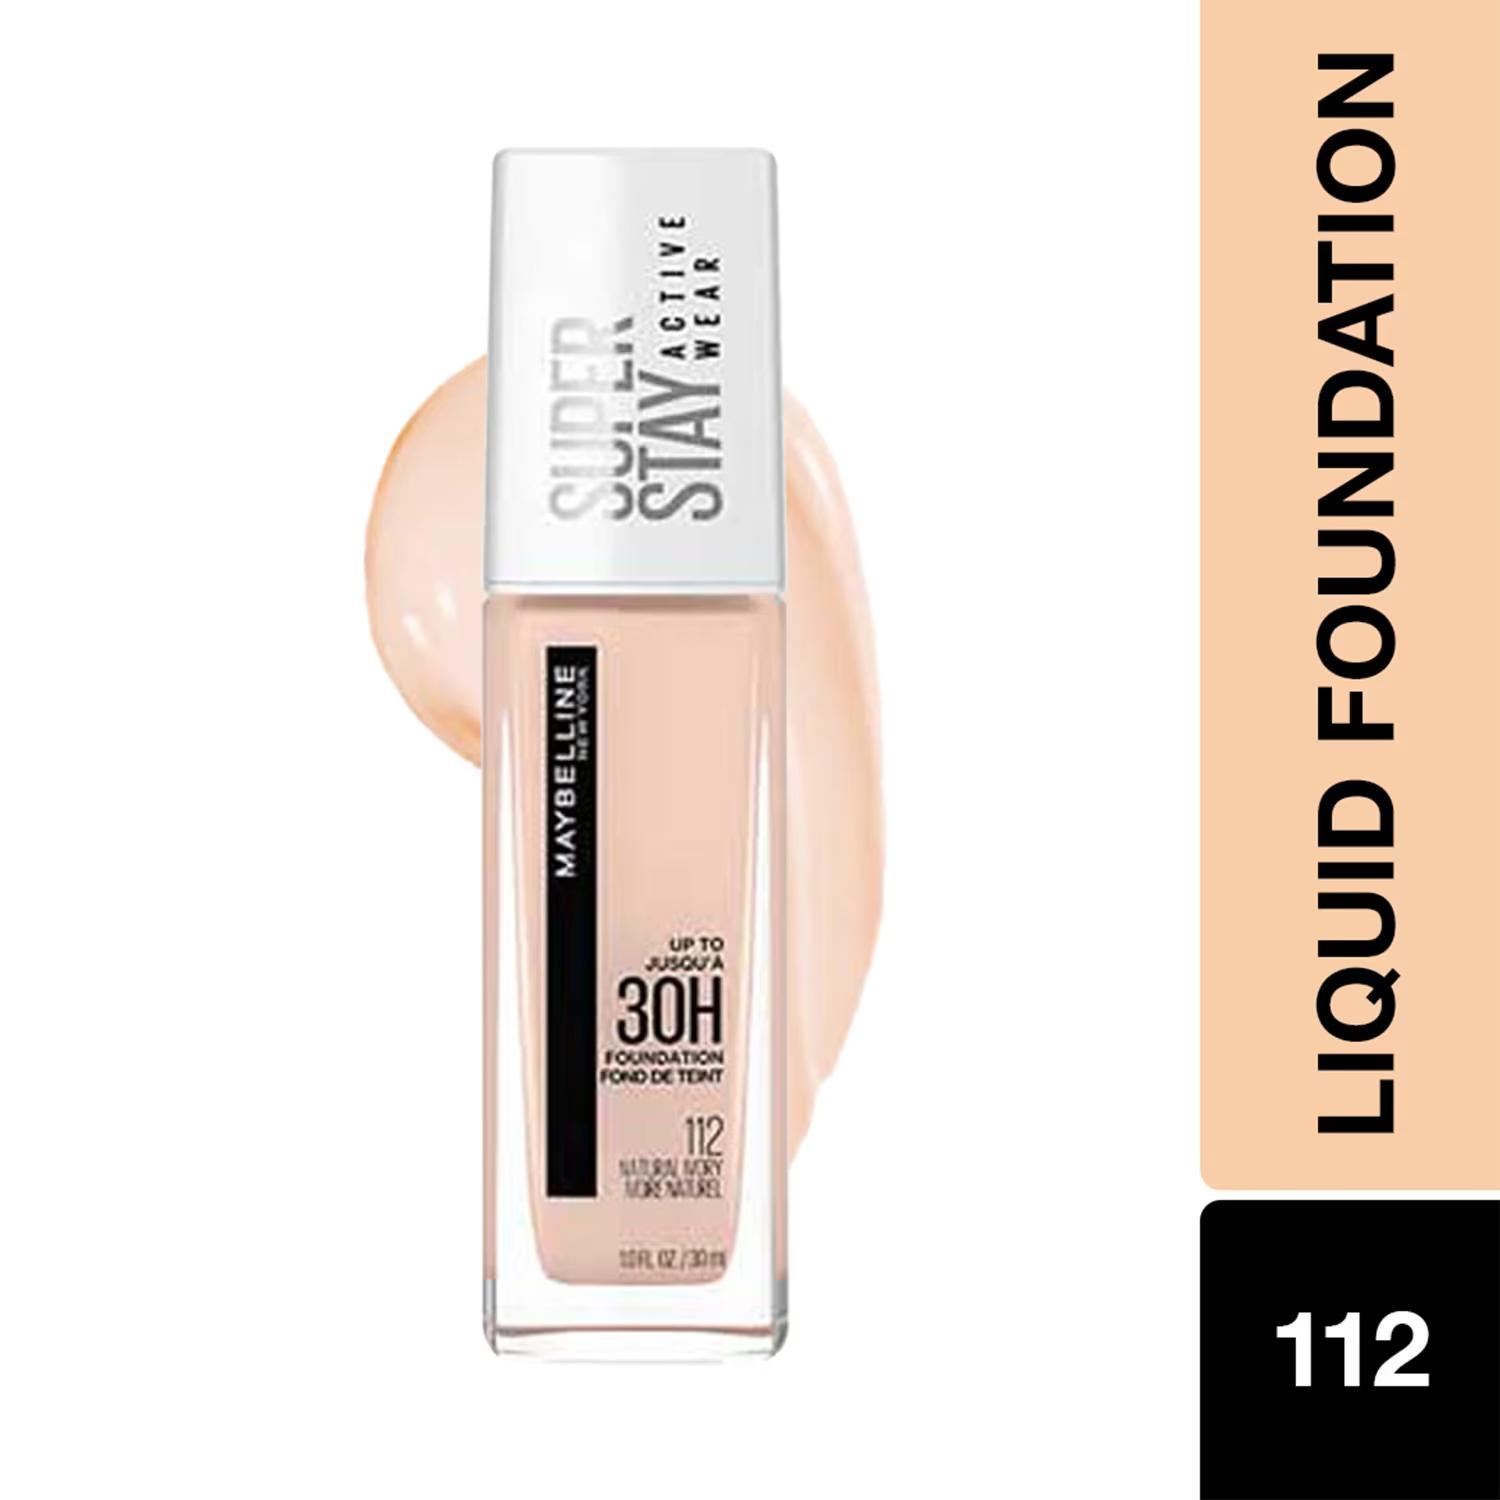 Maybelline New York | Maybelline New York Super Stay 24H Full Coverage Liquid Foundation-112 Natural Ivory (30ml)